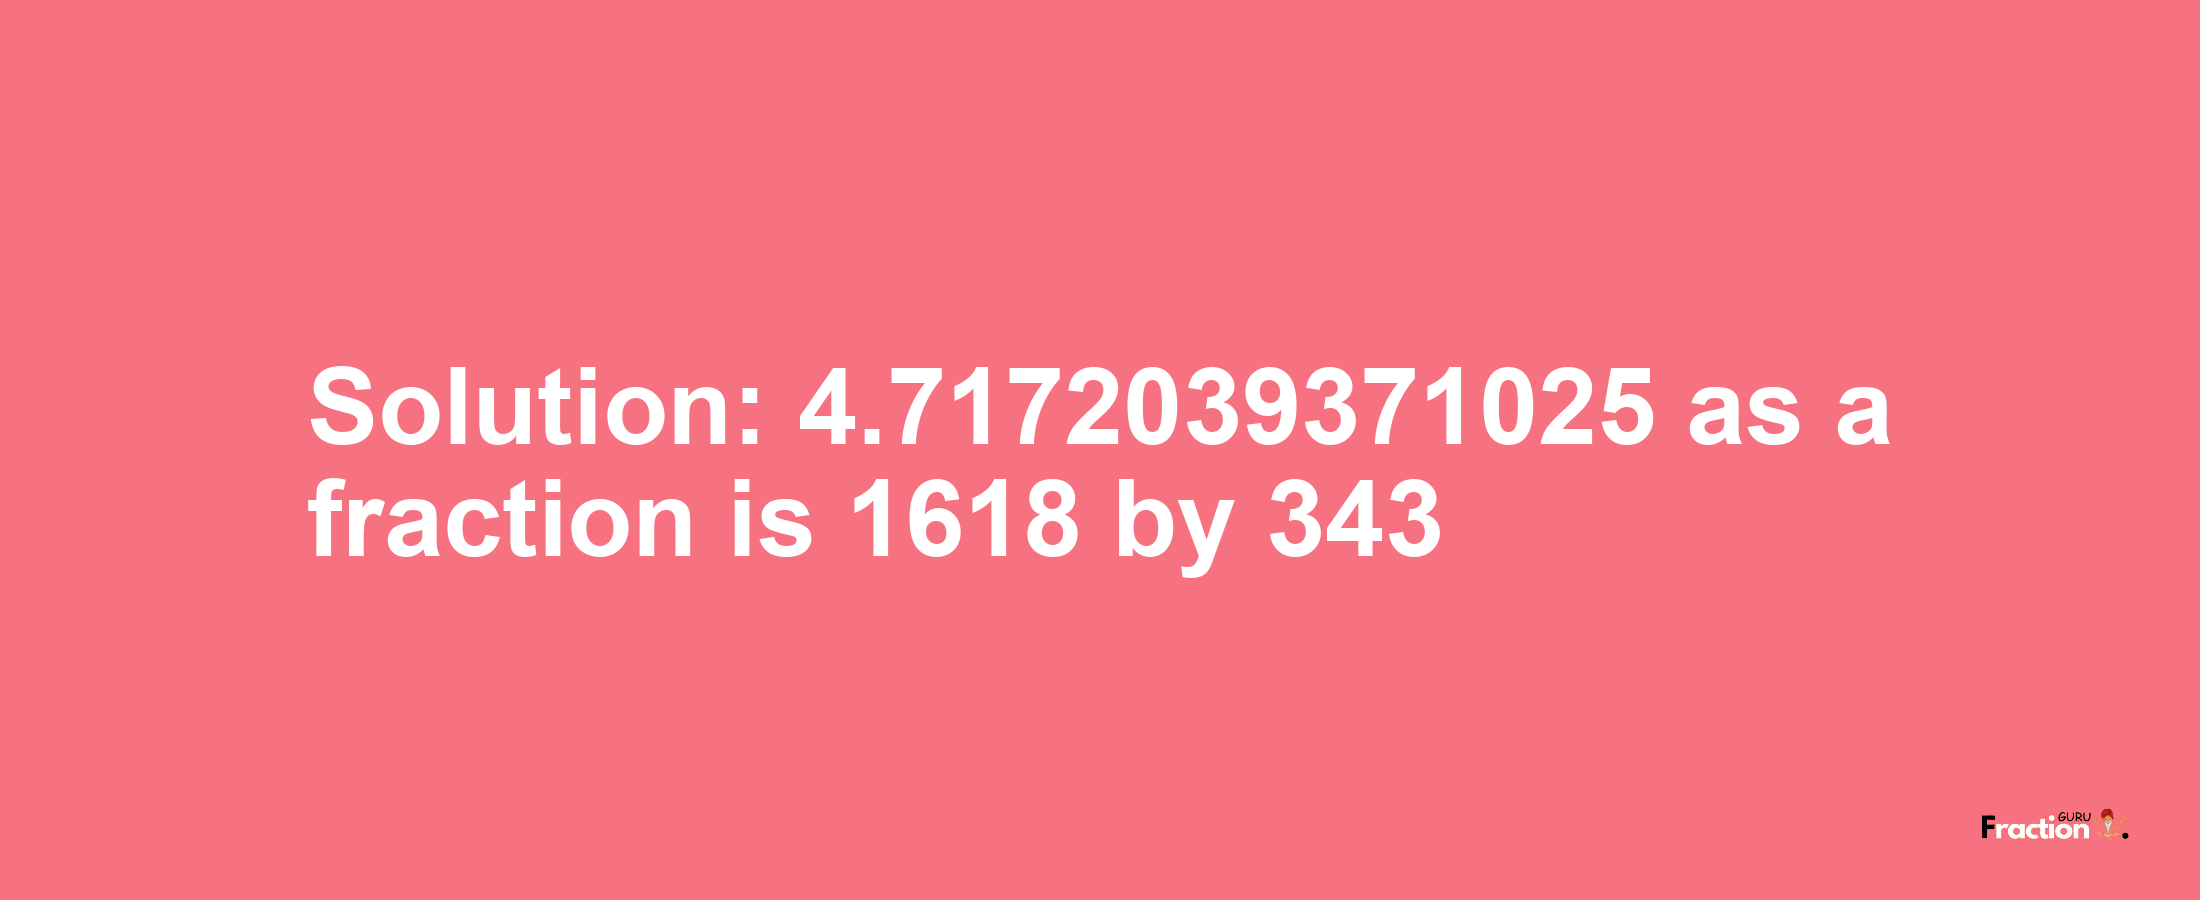 Solution:4.7172039371025 as a fraction is 1618/343